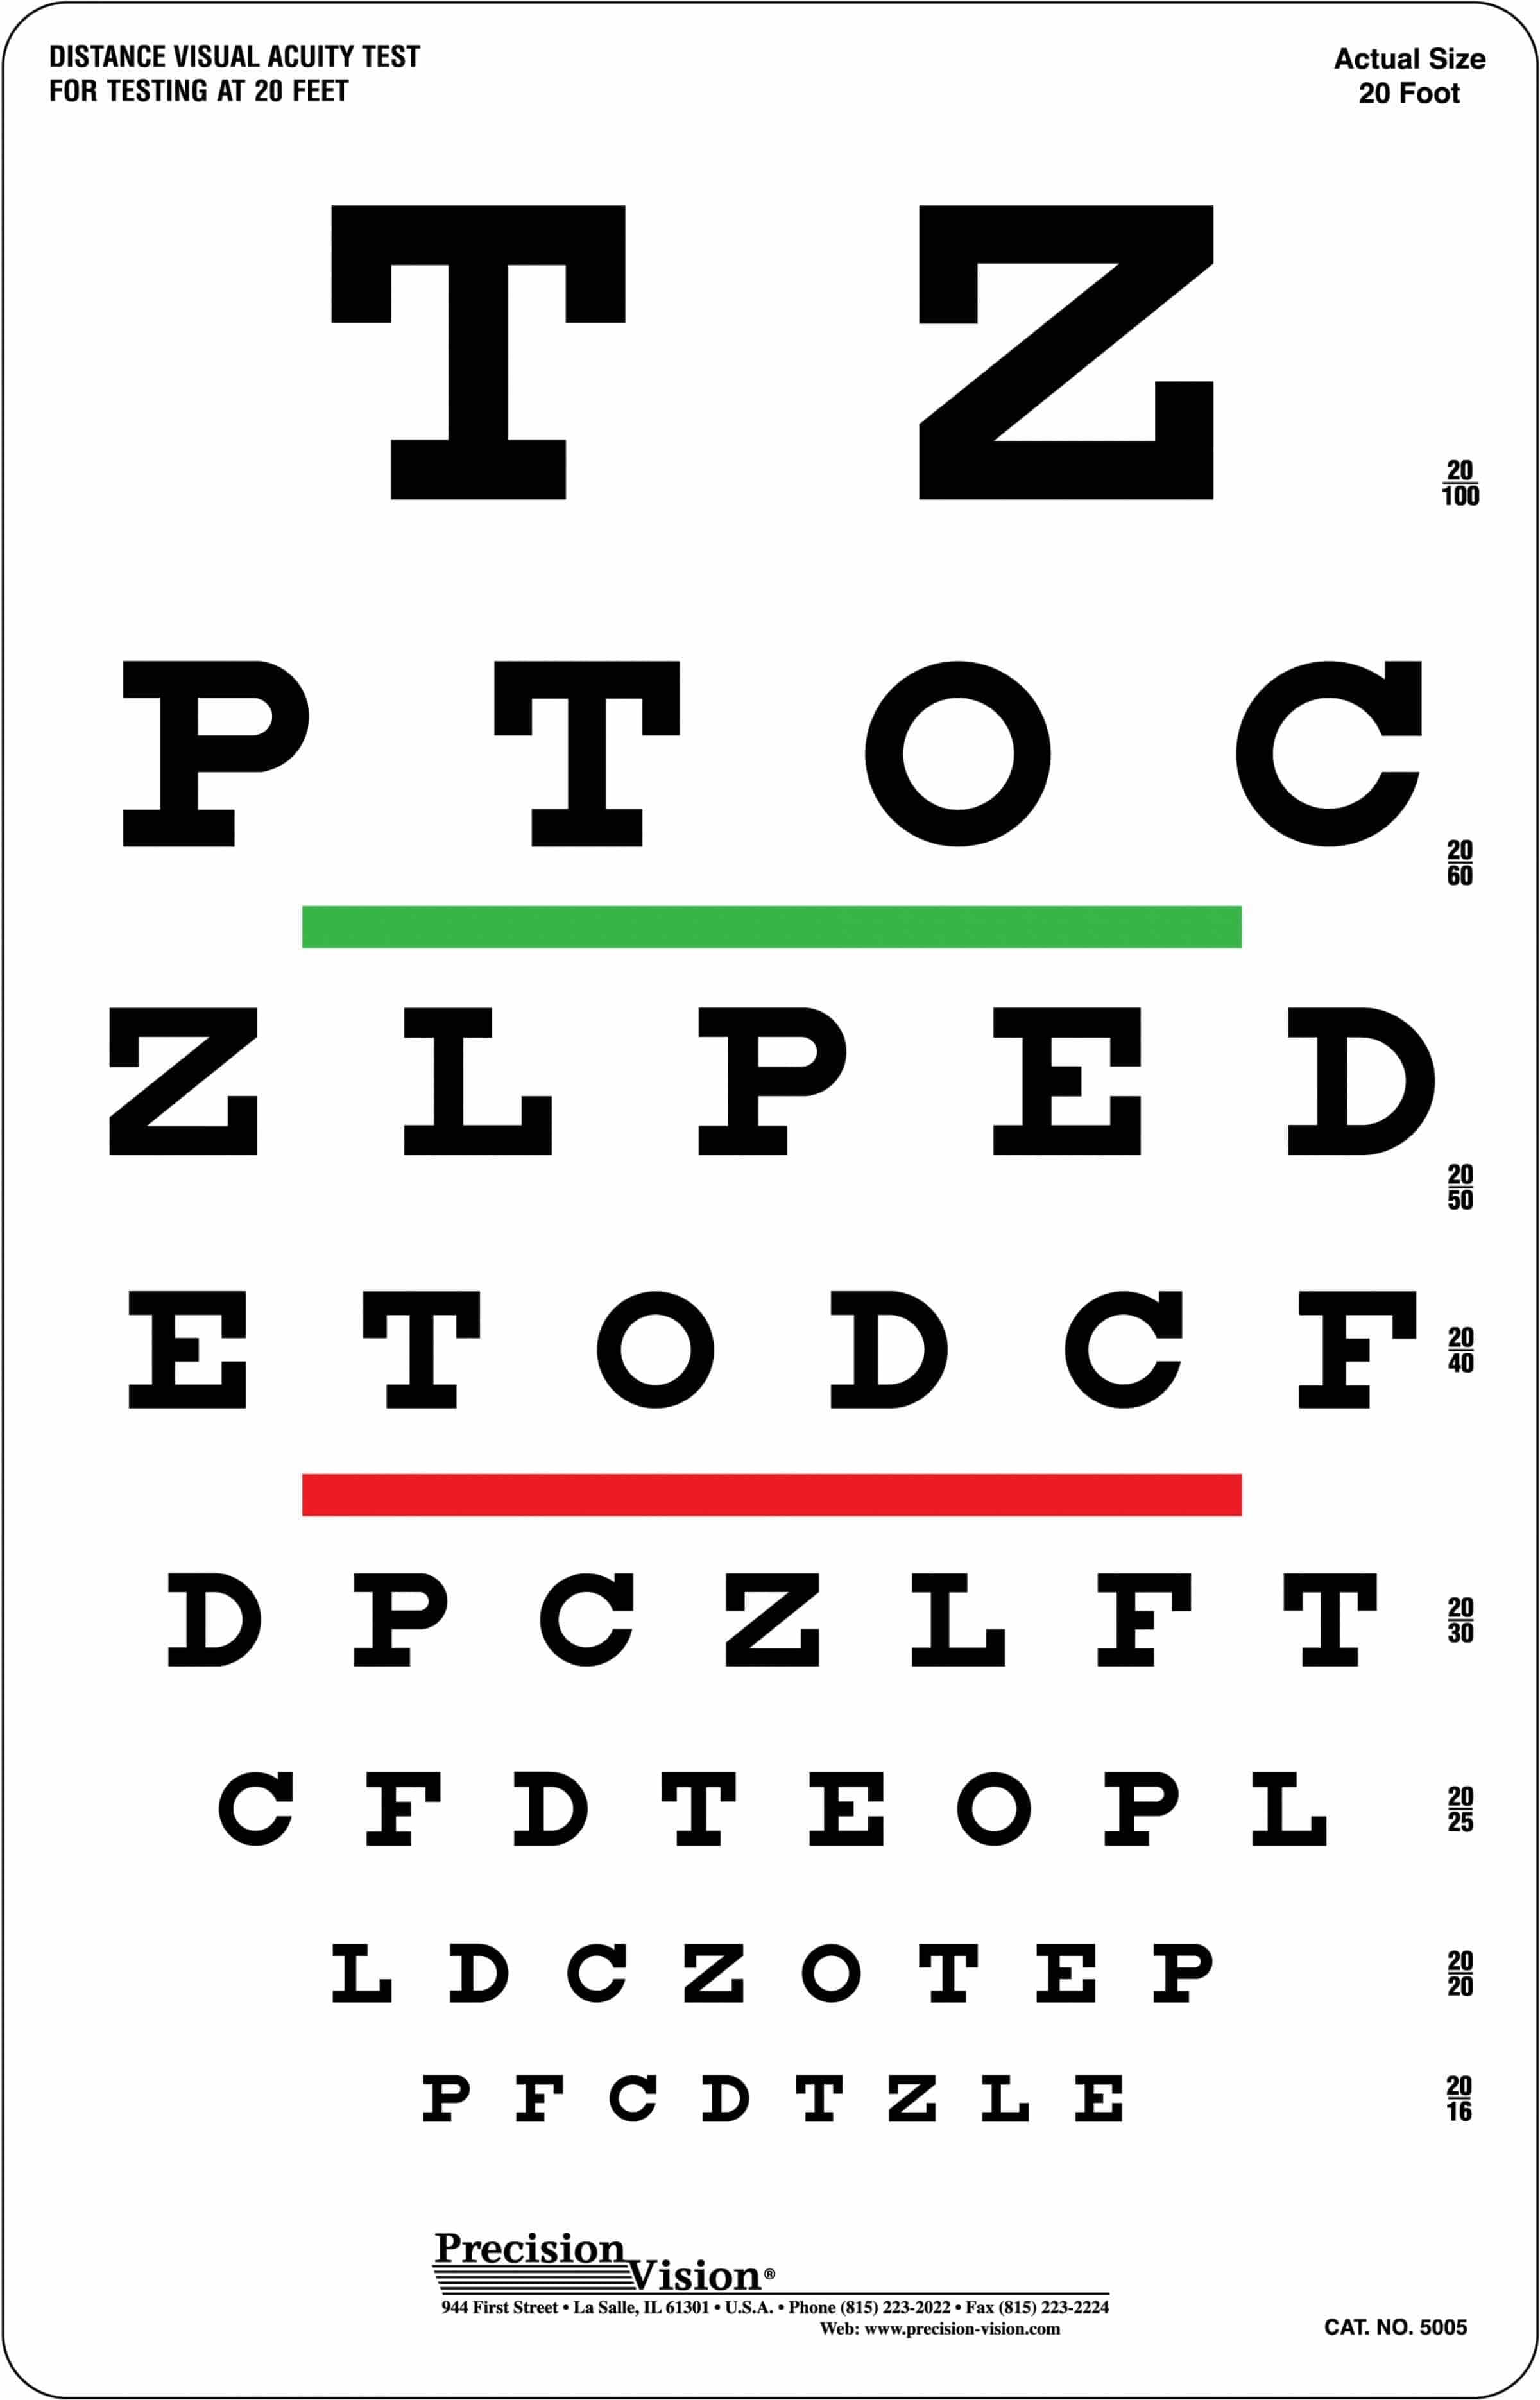 Snellen Eye Chart for Visual Acuity and Color Vision Test - Precision ...